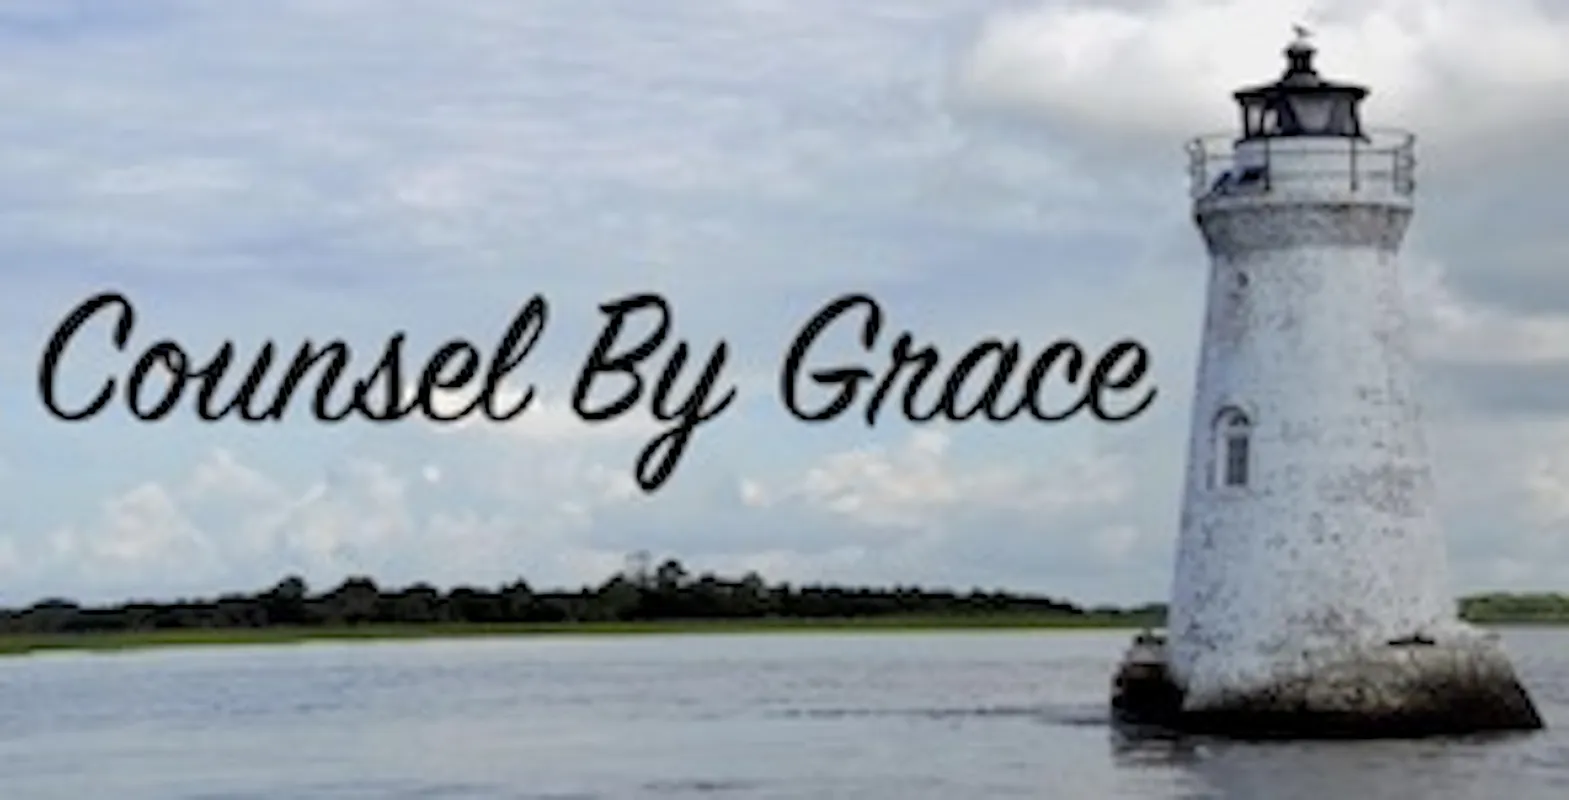 Counsel By Grace with a lighthouse